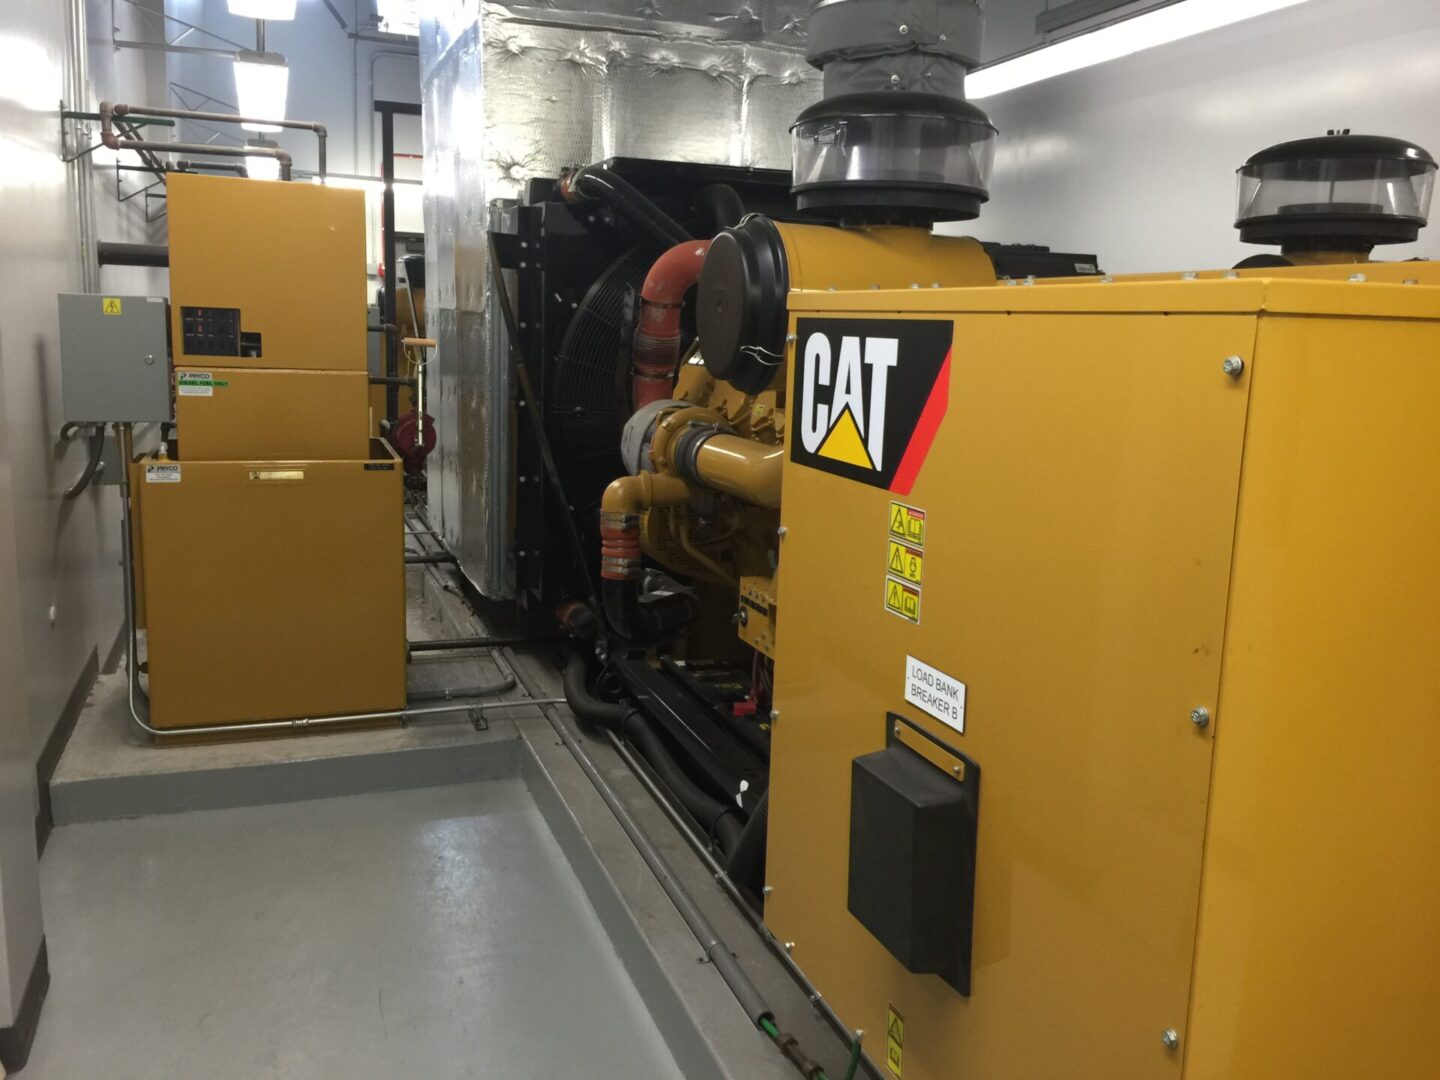 Yellow CAT heavy equipment with cylindrical tubes attached to a wall-sized ventilation fan